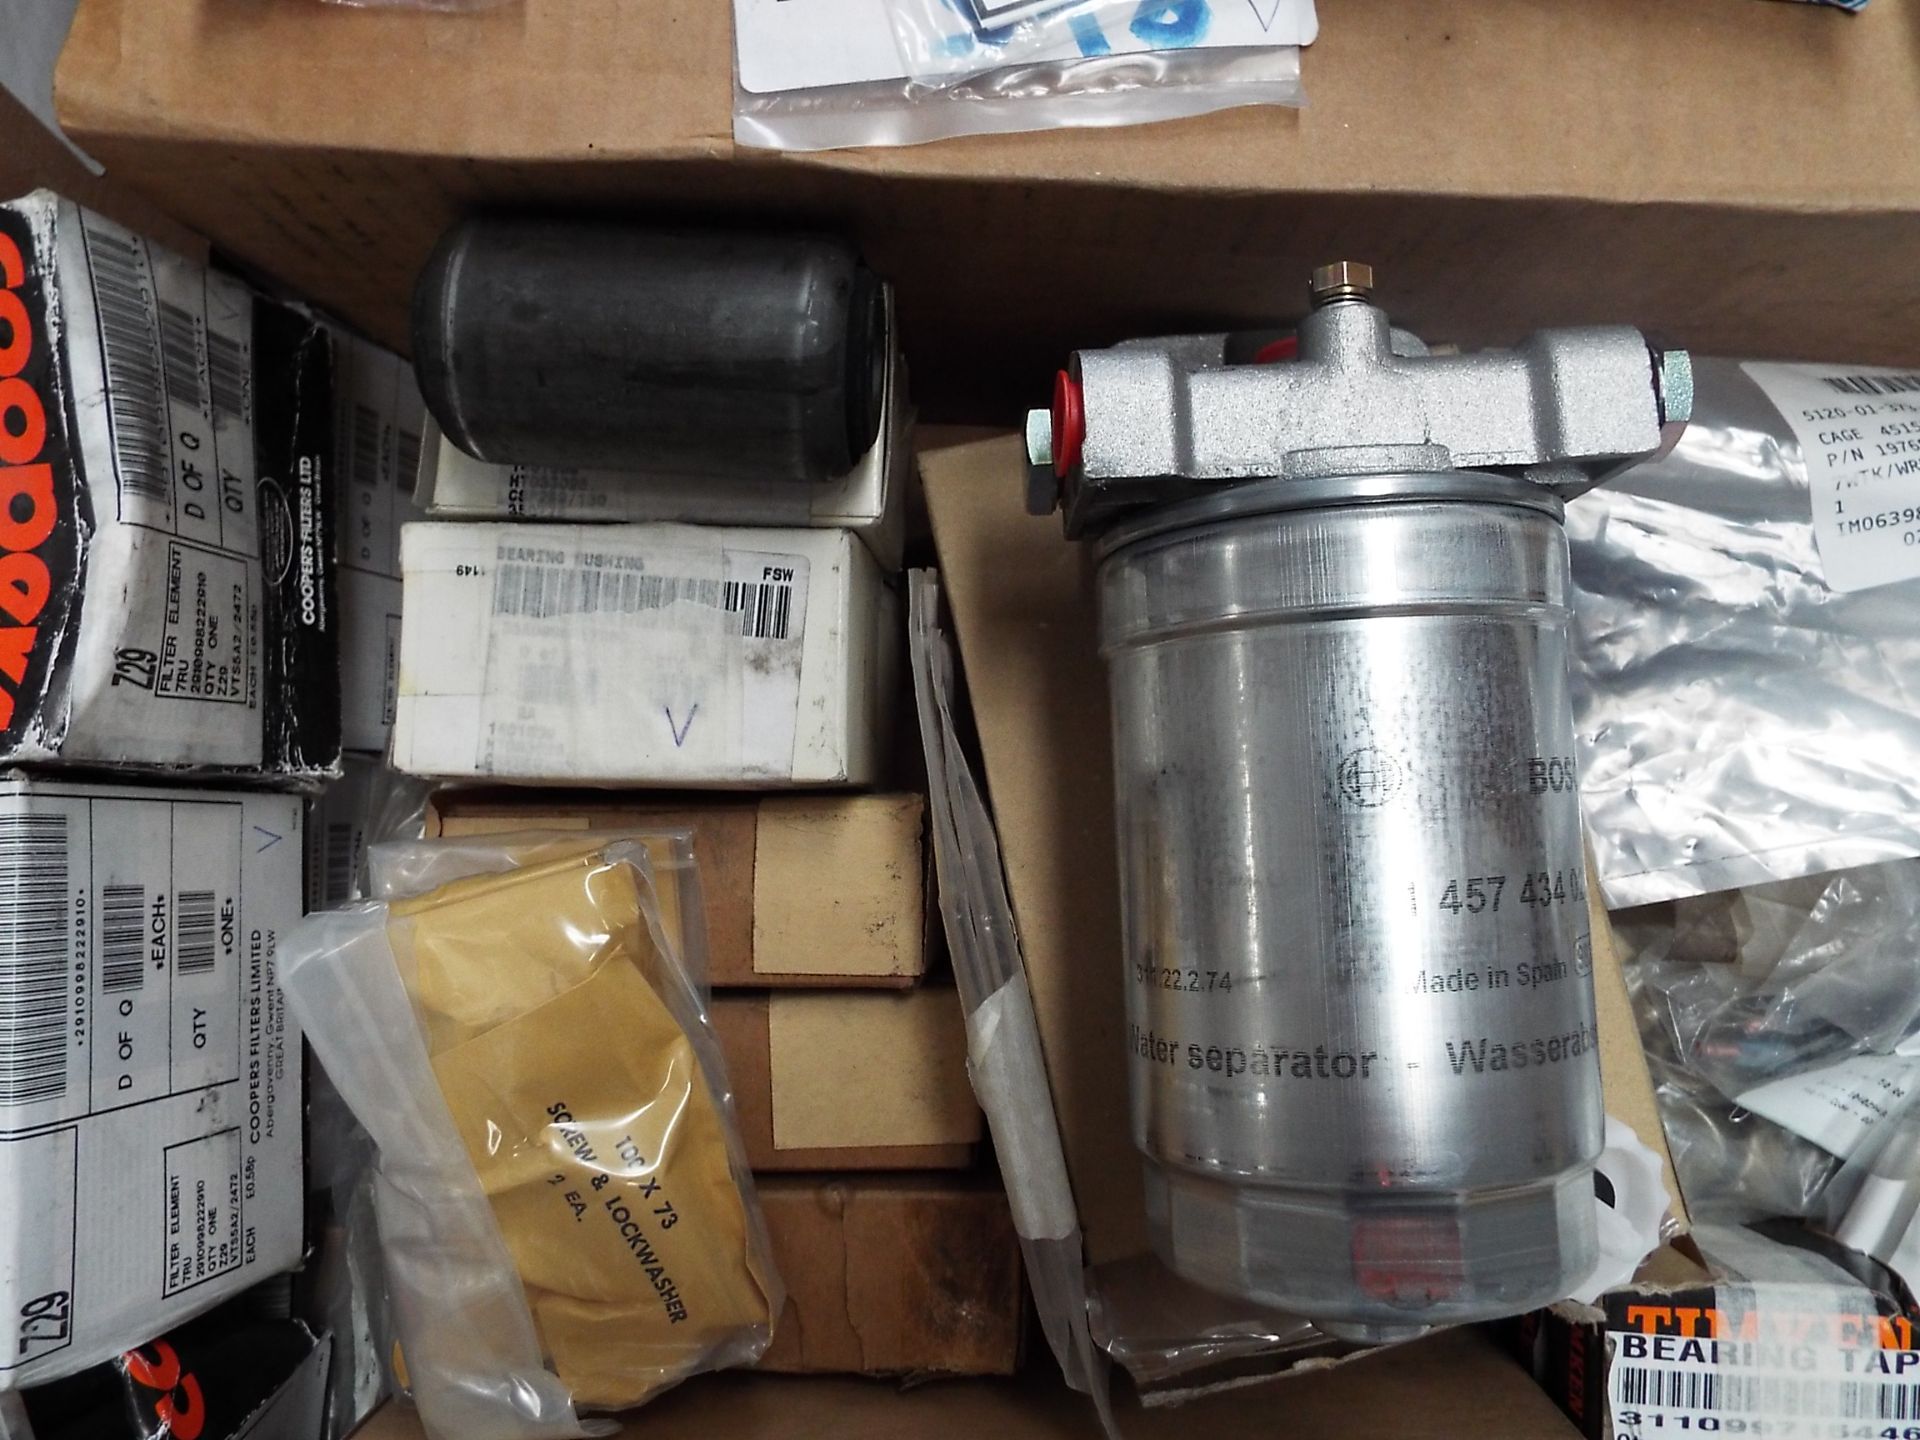 Mixed Stillage of Truck Parts inc Valves, Reflectors, Filters, Wheel Weights etc - Image 4 of 14